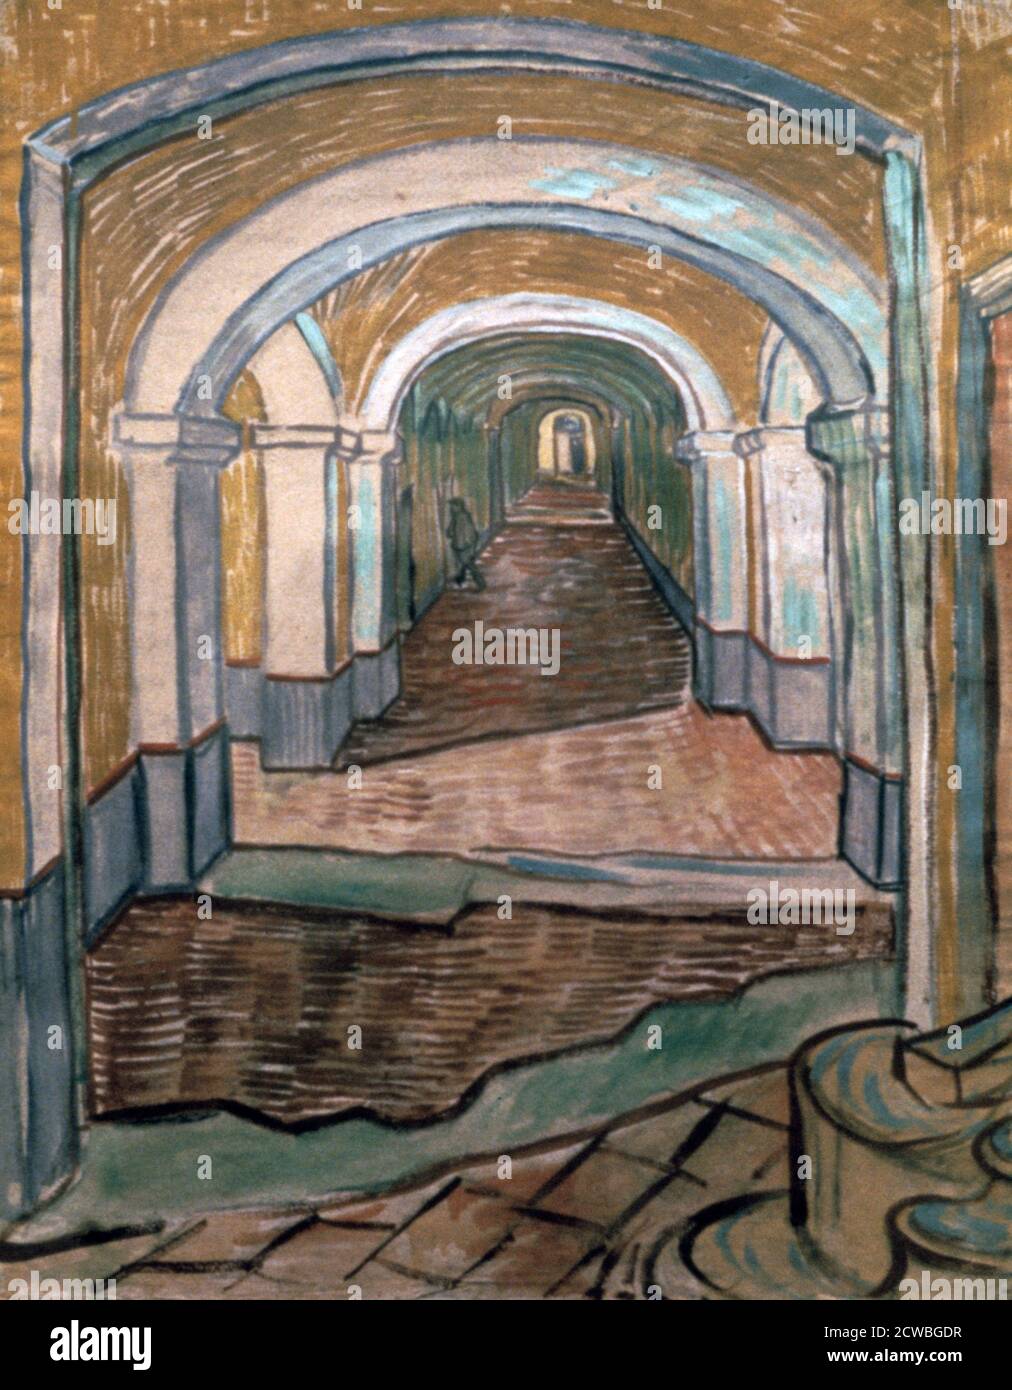 Vestibule of Asylum' vincent van gogh, 1889. From the collection of the Rijksmuseum, Amsterdam, Netherlands. Stock Photo